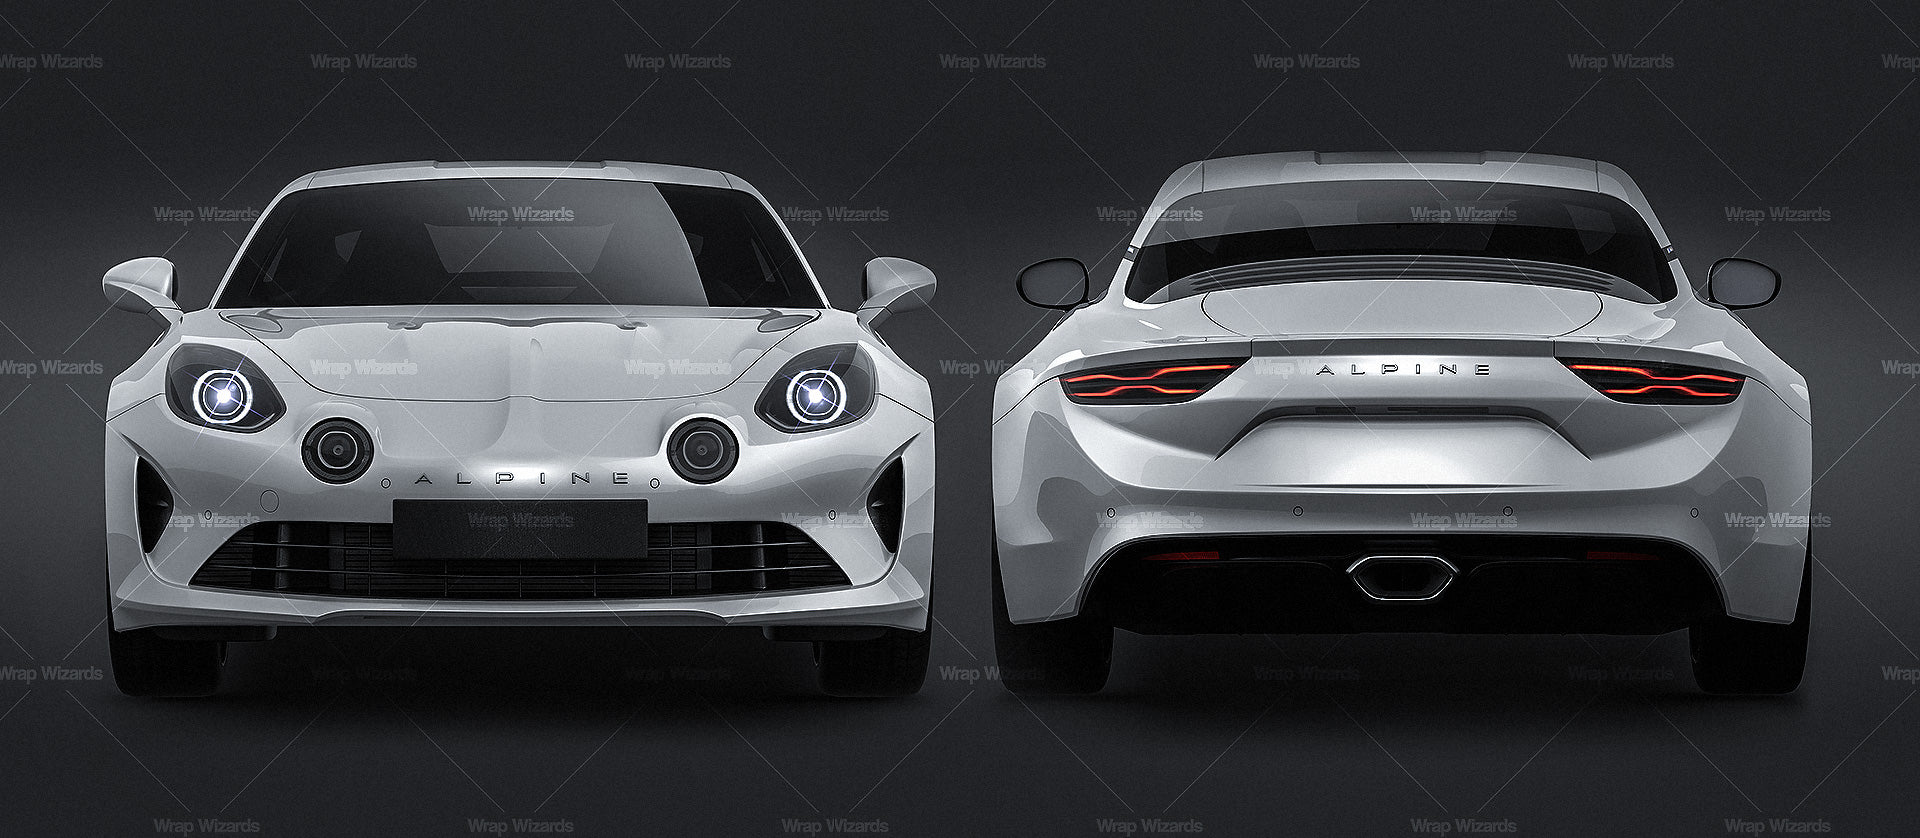 Renault Alpine A110 2018 glossy finish - all sides Car Mockup Template.psd